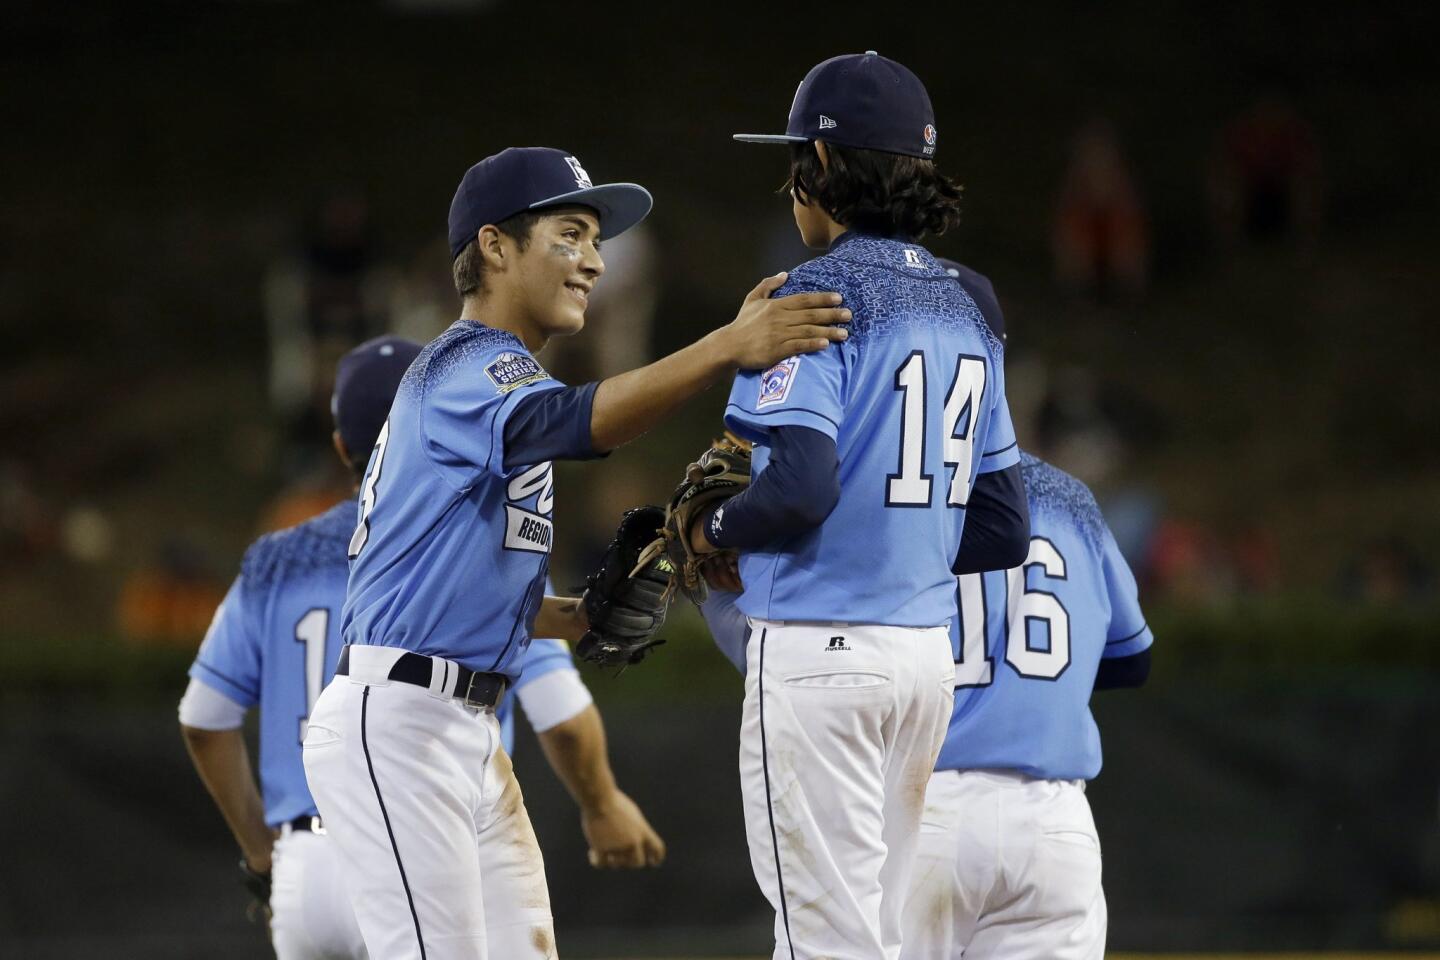 Sweetwater Valley's Antonio Andrade, left, celebrates with Nate Nankil after a strikeout during the sixth inning of a U.S. elimination baseball game against Bowling Green, Ky.